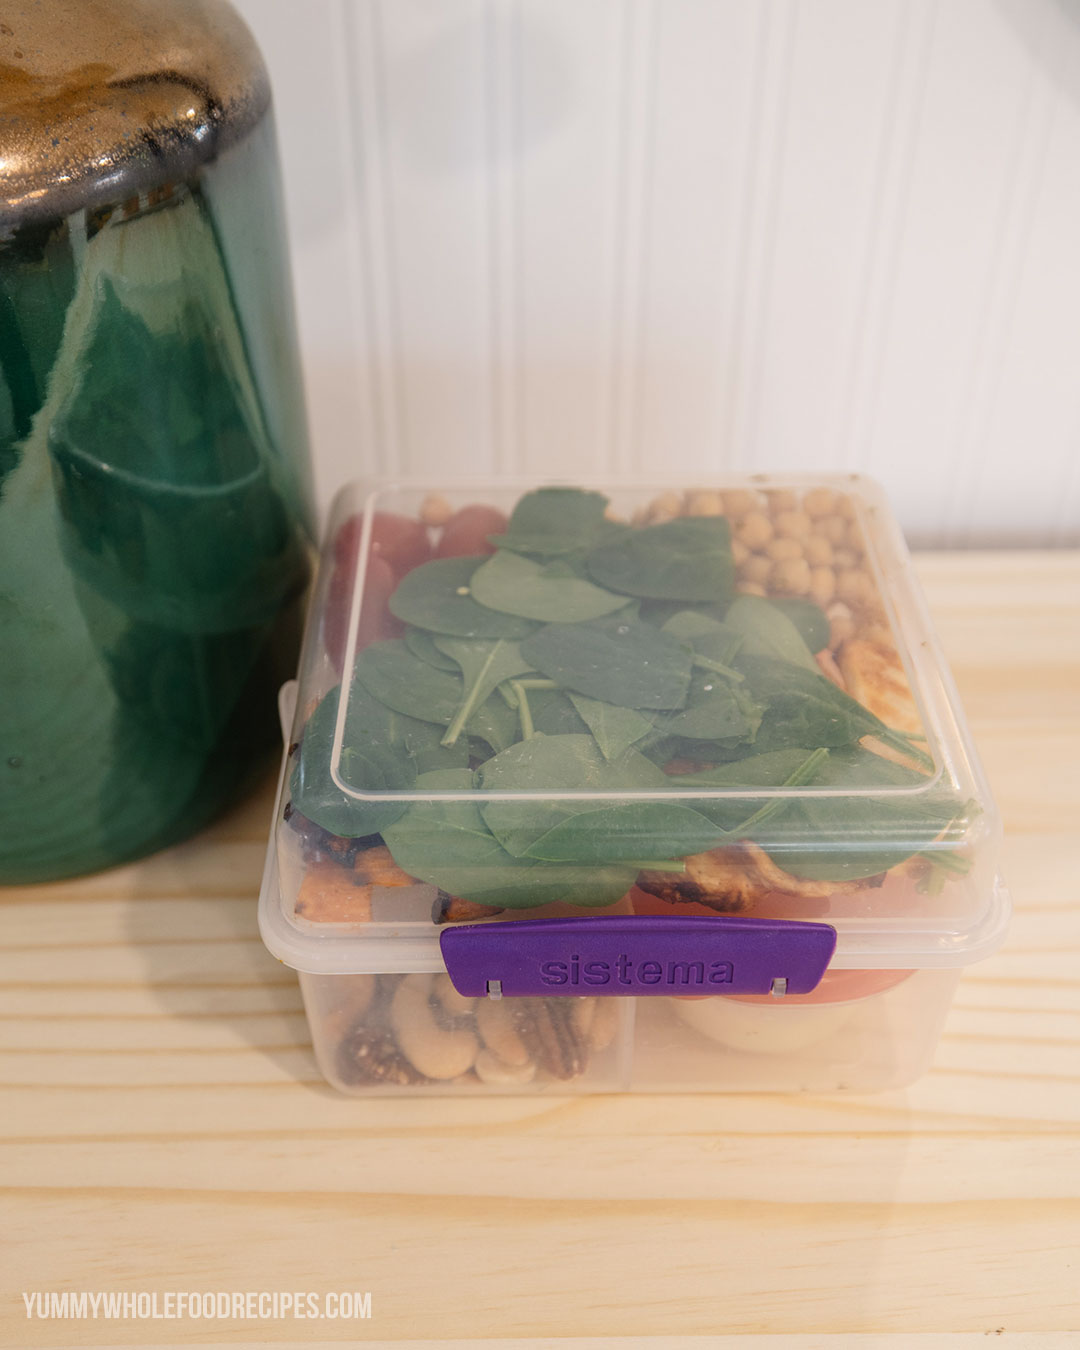 Five healthy lunchbox meal ideas to enjoy on the go - IKEA